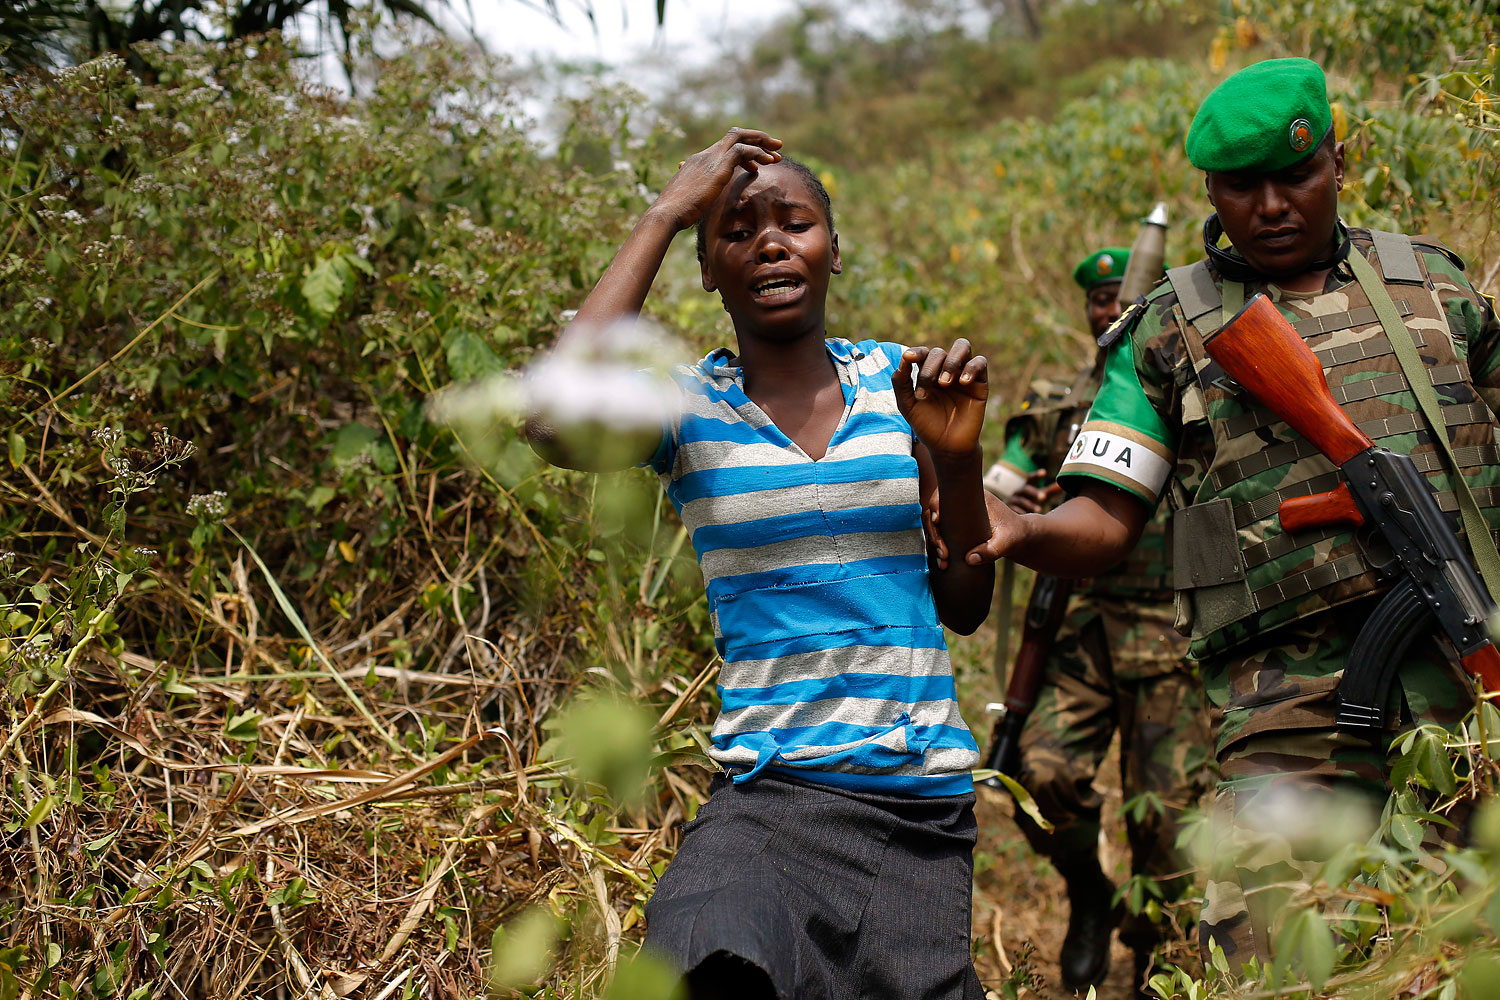 A terrified woman walks down from the bush in the hills 10 miles outside Bangui, Jan. 24, 2014, as Rwandan troops tell her to calm down during a weapons search operation.